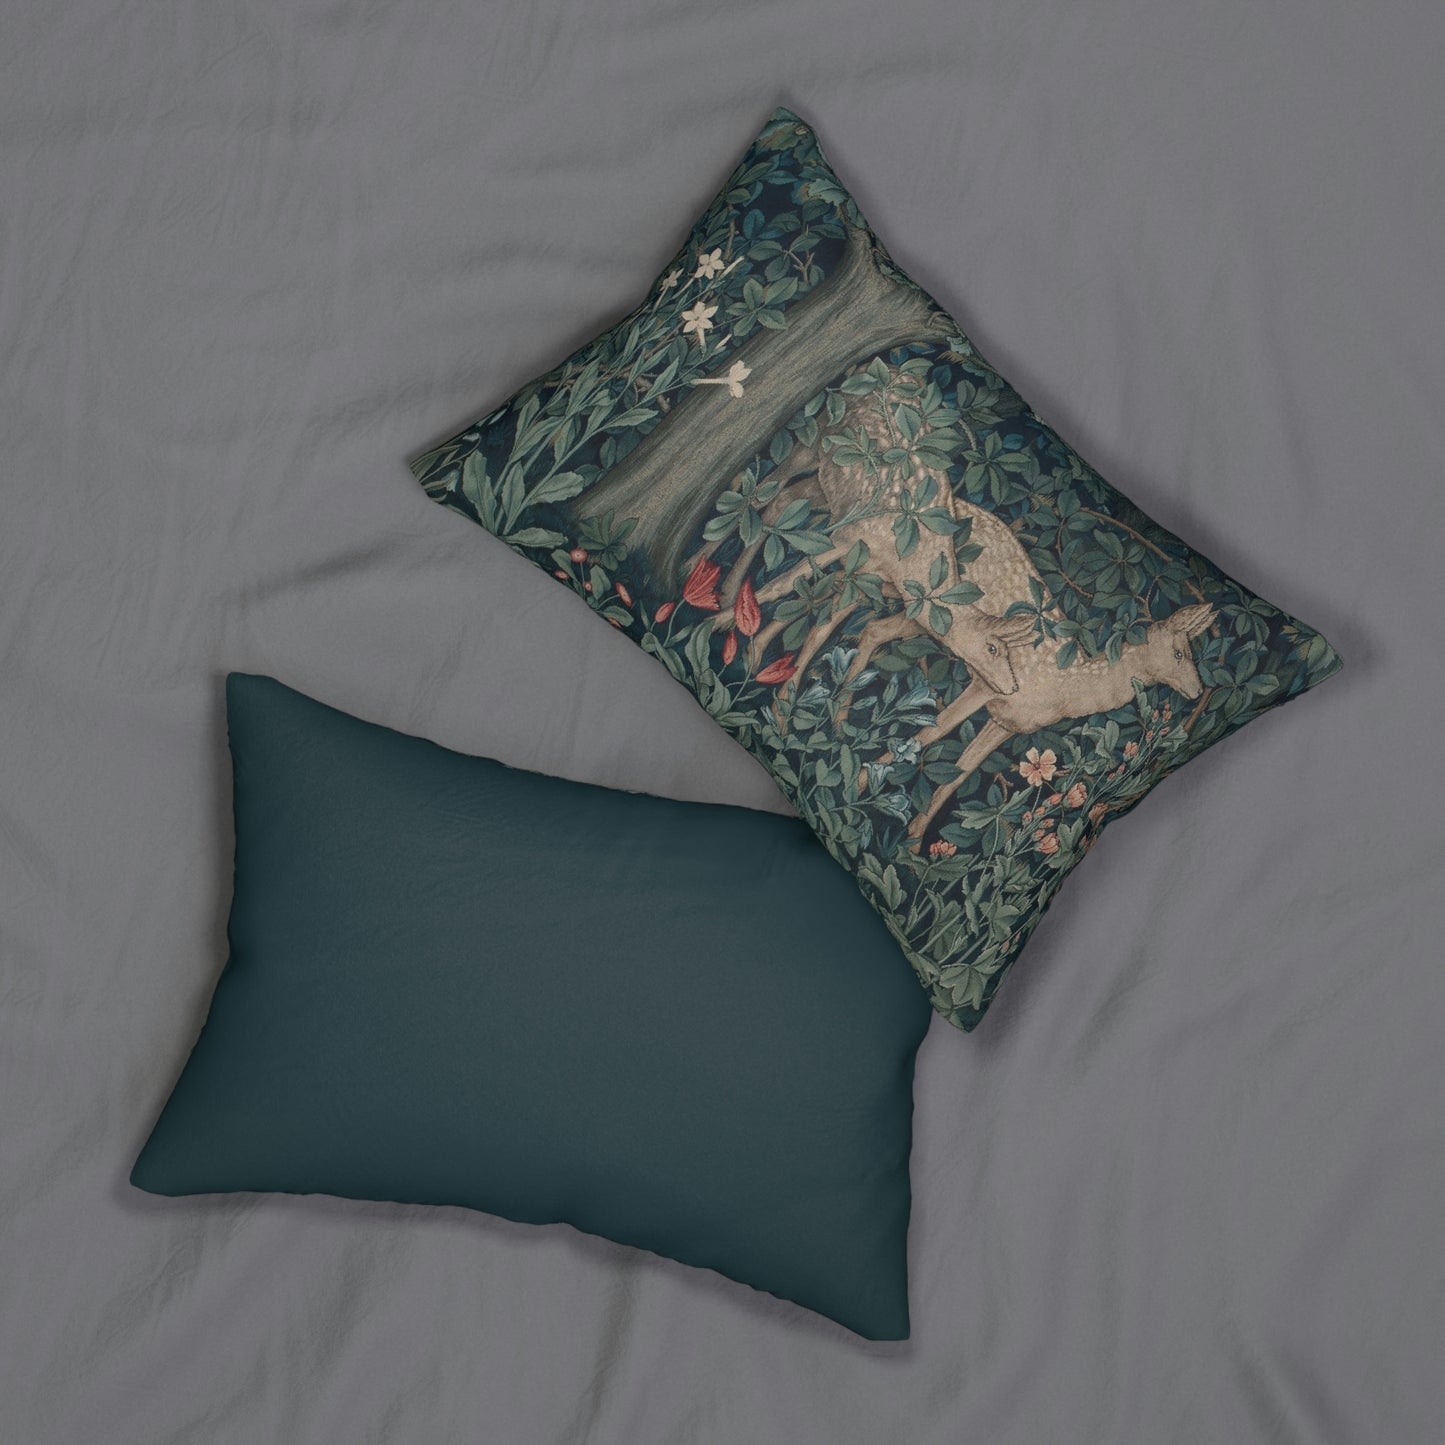 William Morris & Co Lumbar Cushion - 'Dear' (Right)- Green Forest Collection